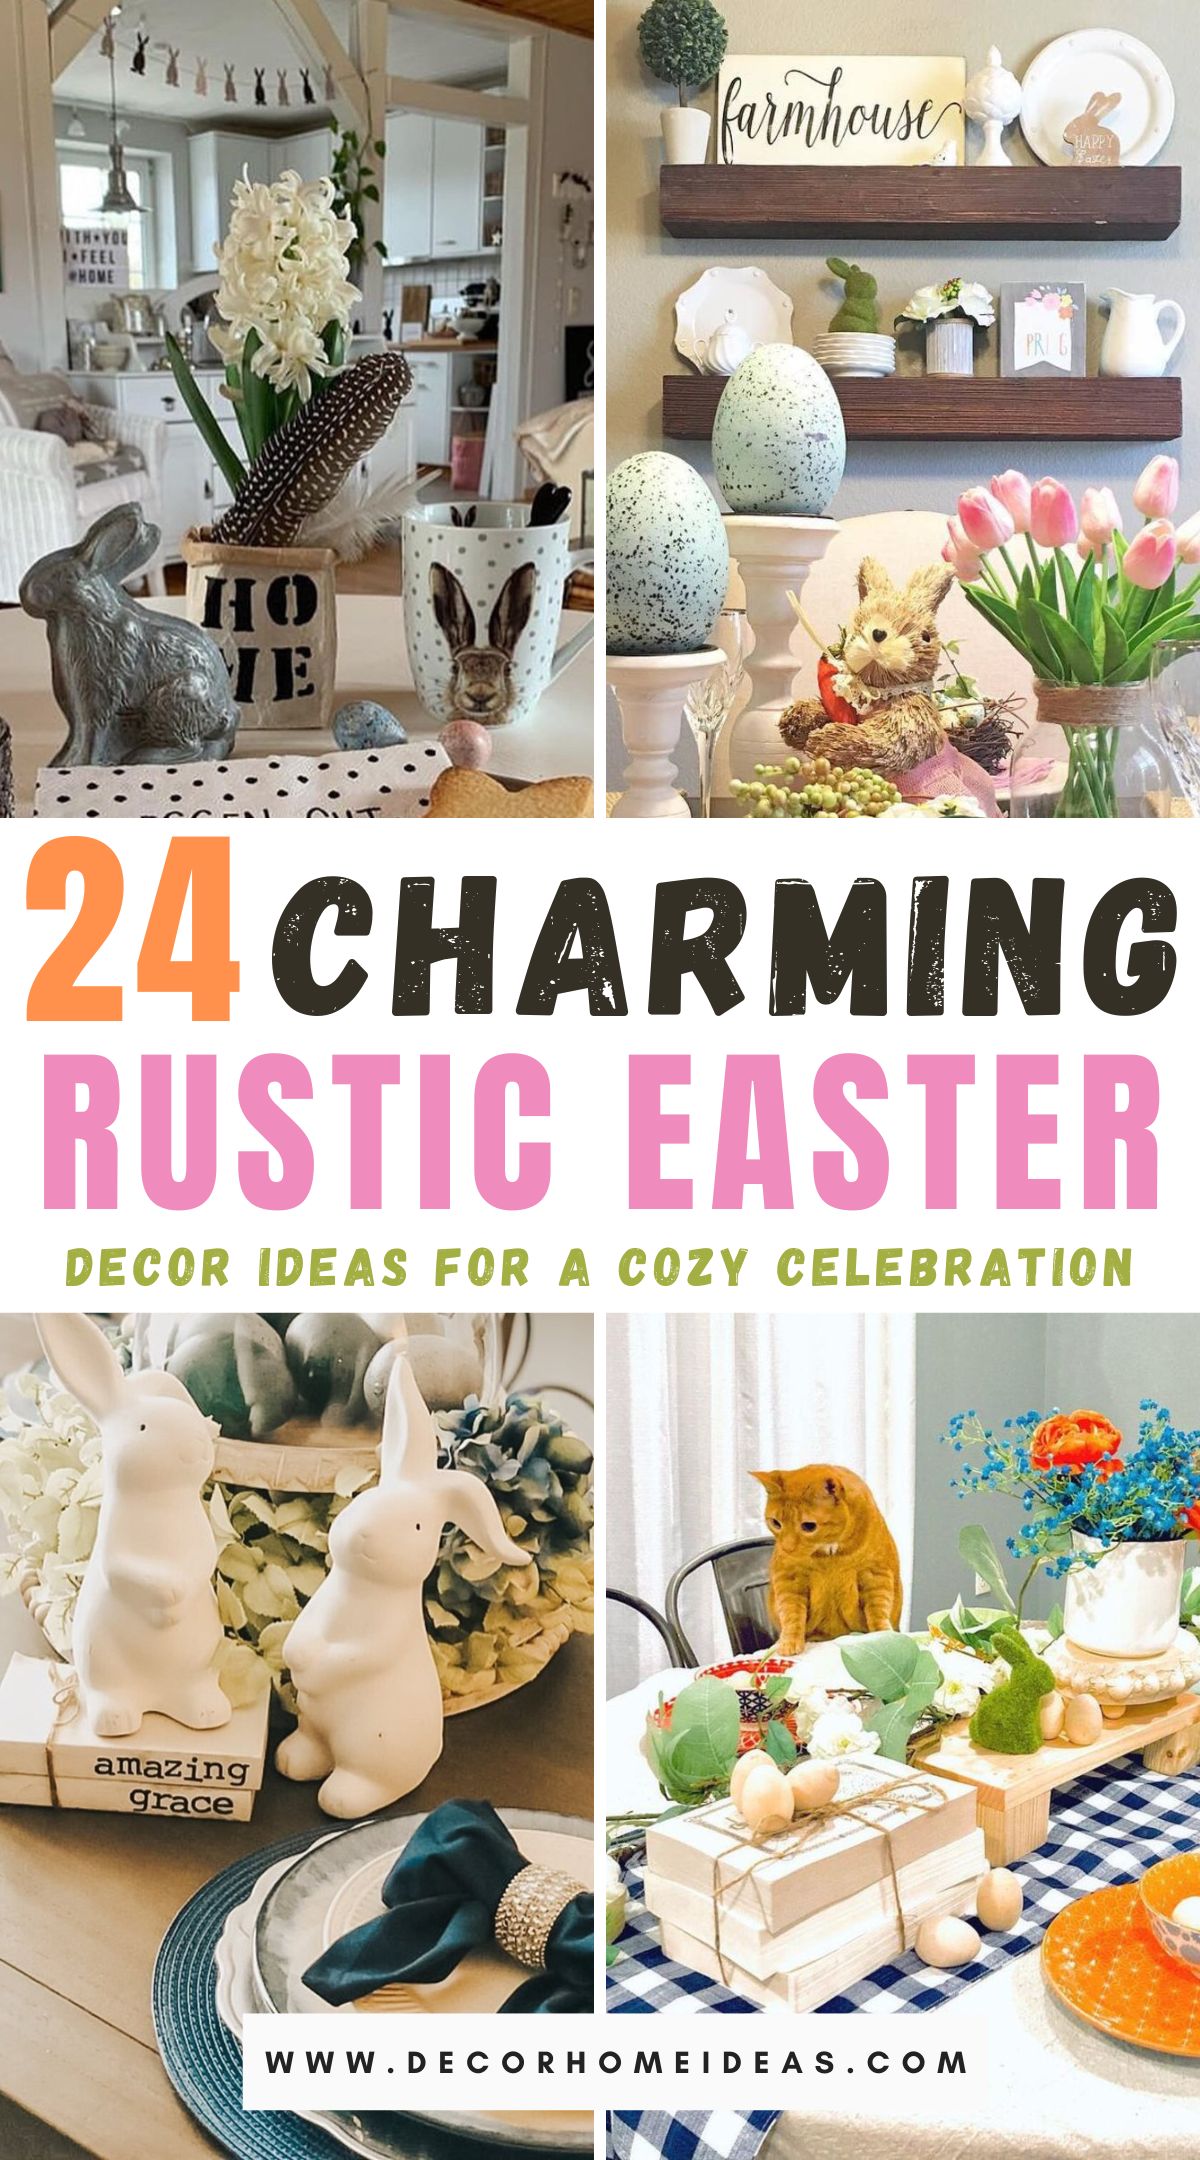 Infuse your home with springtime charm using these 24 rustic Easter decor ideas. From charming wreaths to delightful table settings, explore creative ways to bring the spirit of Easter into your home with rustic-inspired touches that exude warmth and character.